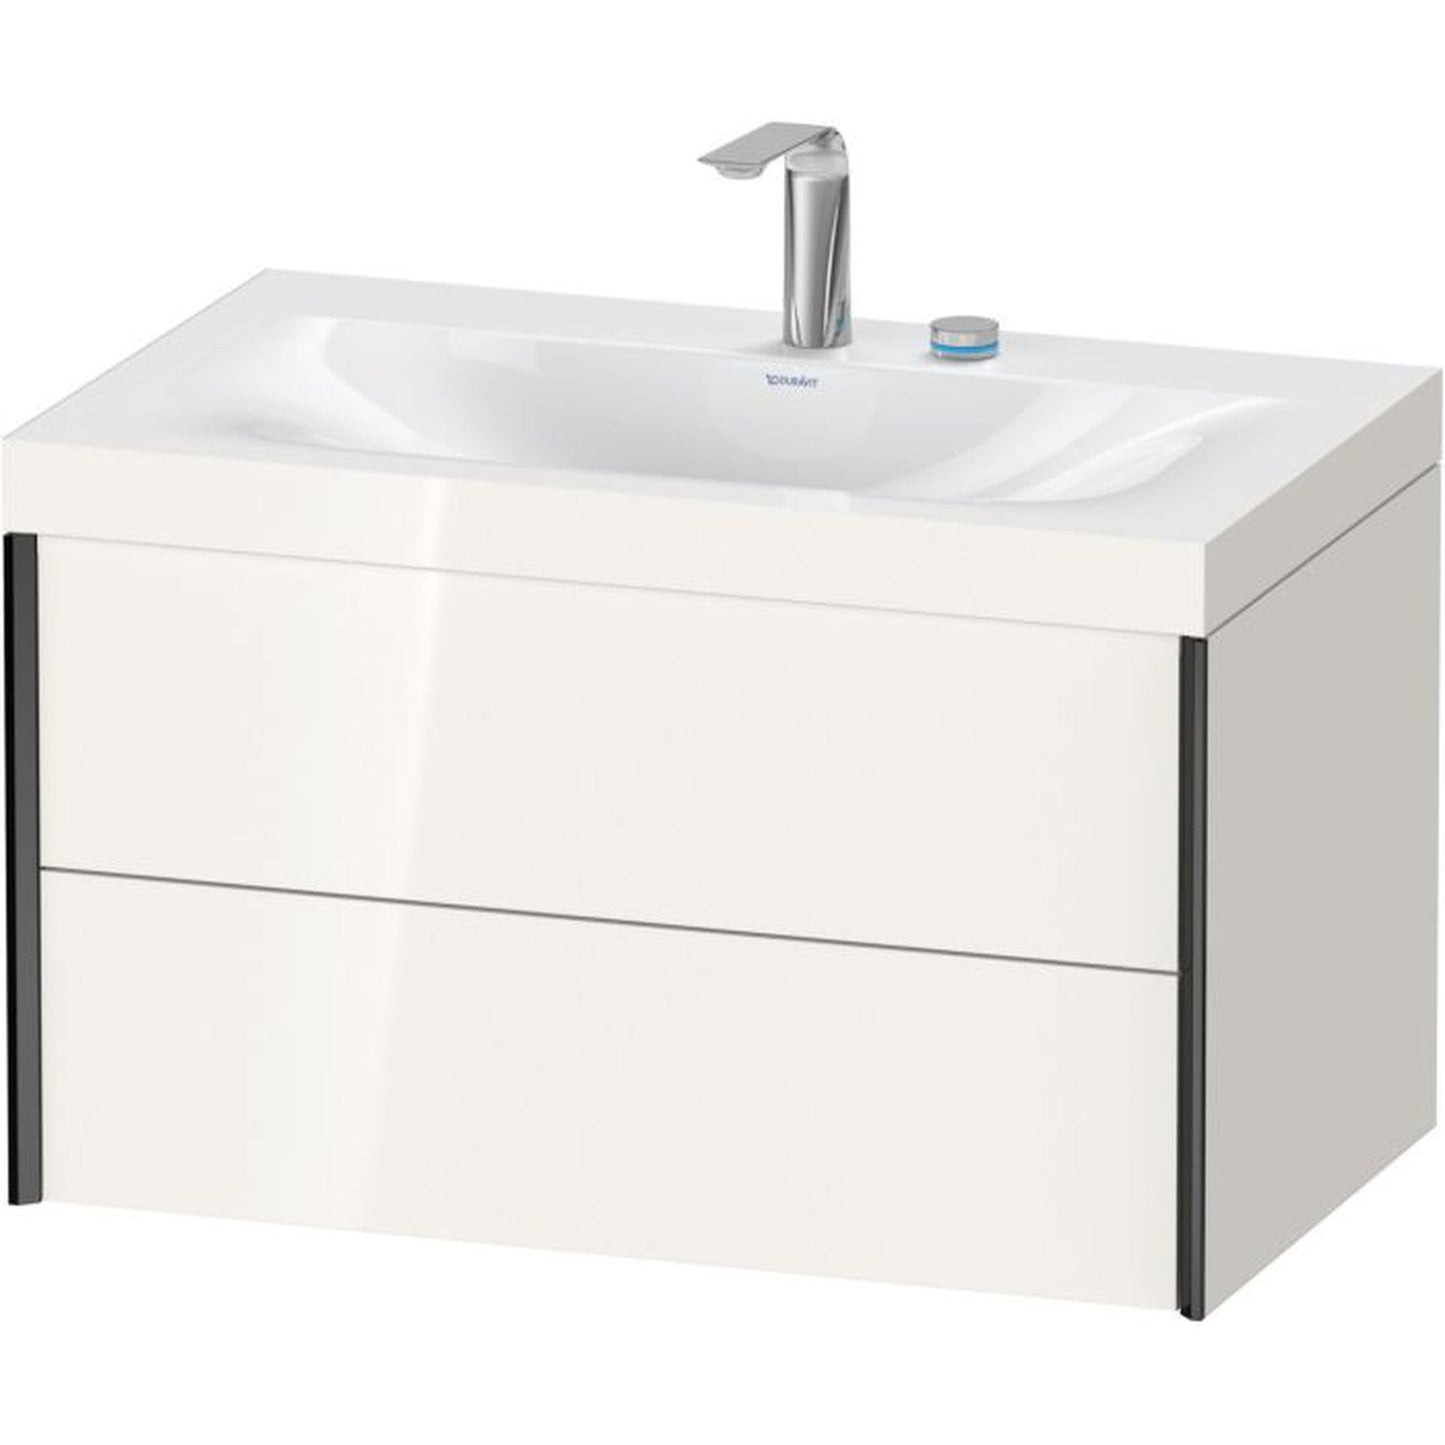 Duravit Xviu 31" x 20" x 19" Two Drawer C-Bonded Wall-Mount Vanity Kit With Two Tap Holes, White (XV4615EB222C)